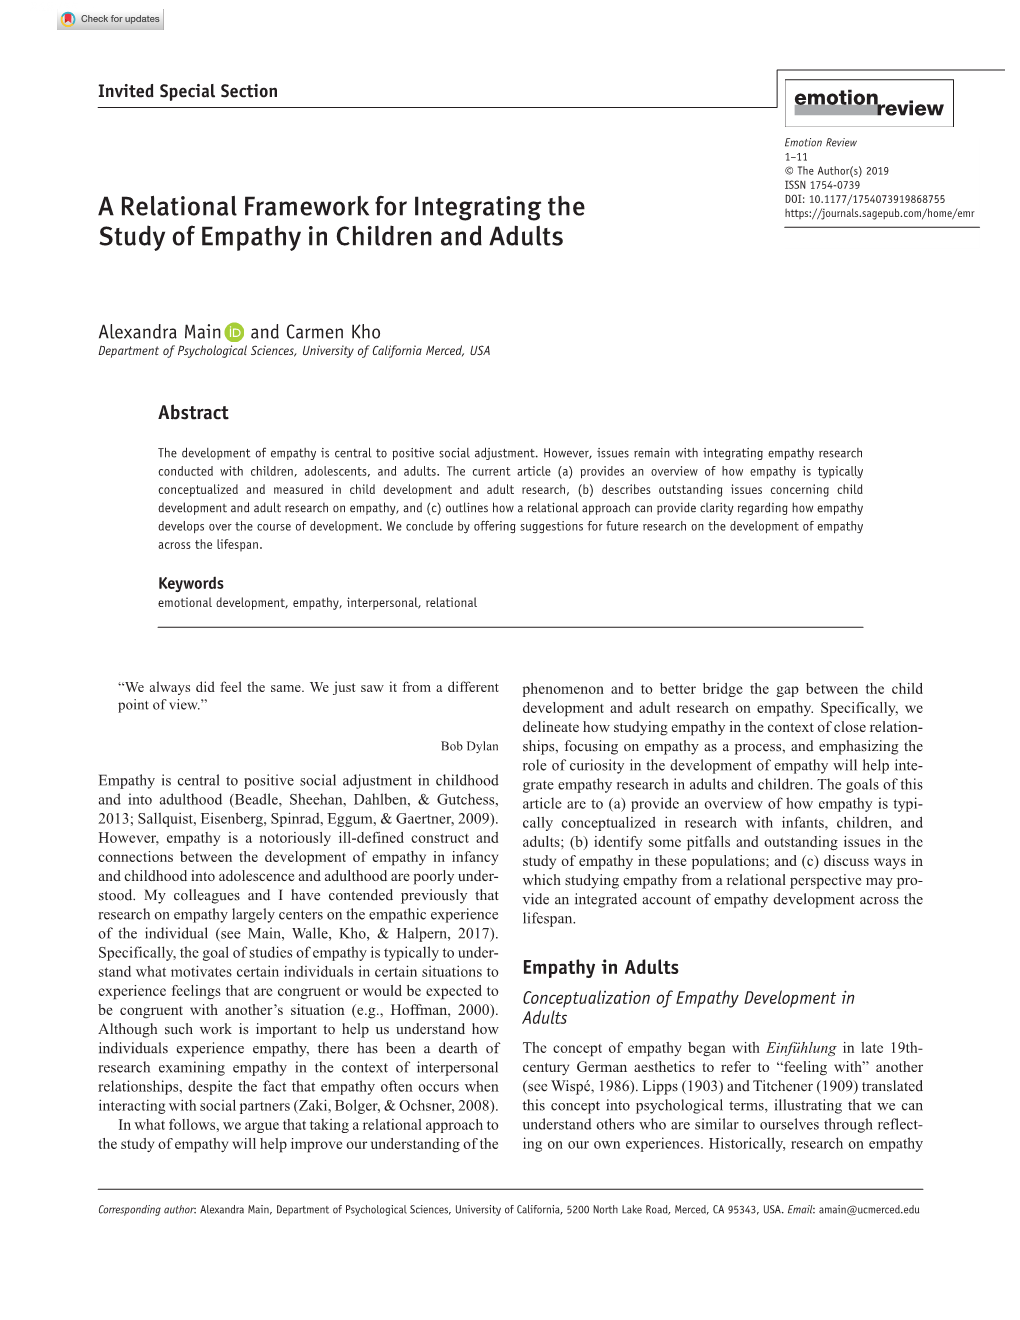 A Relational Framework for Integrating the Study of Empathy in Children and Adults